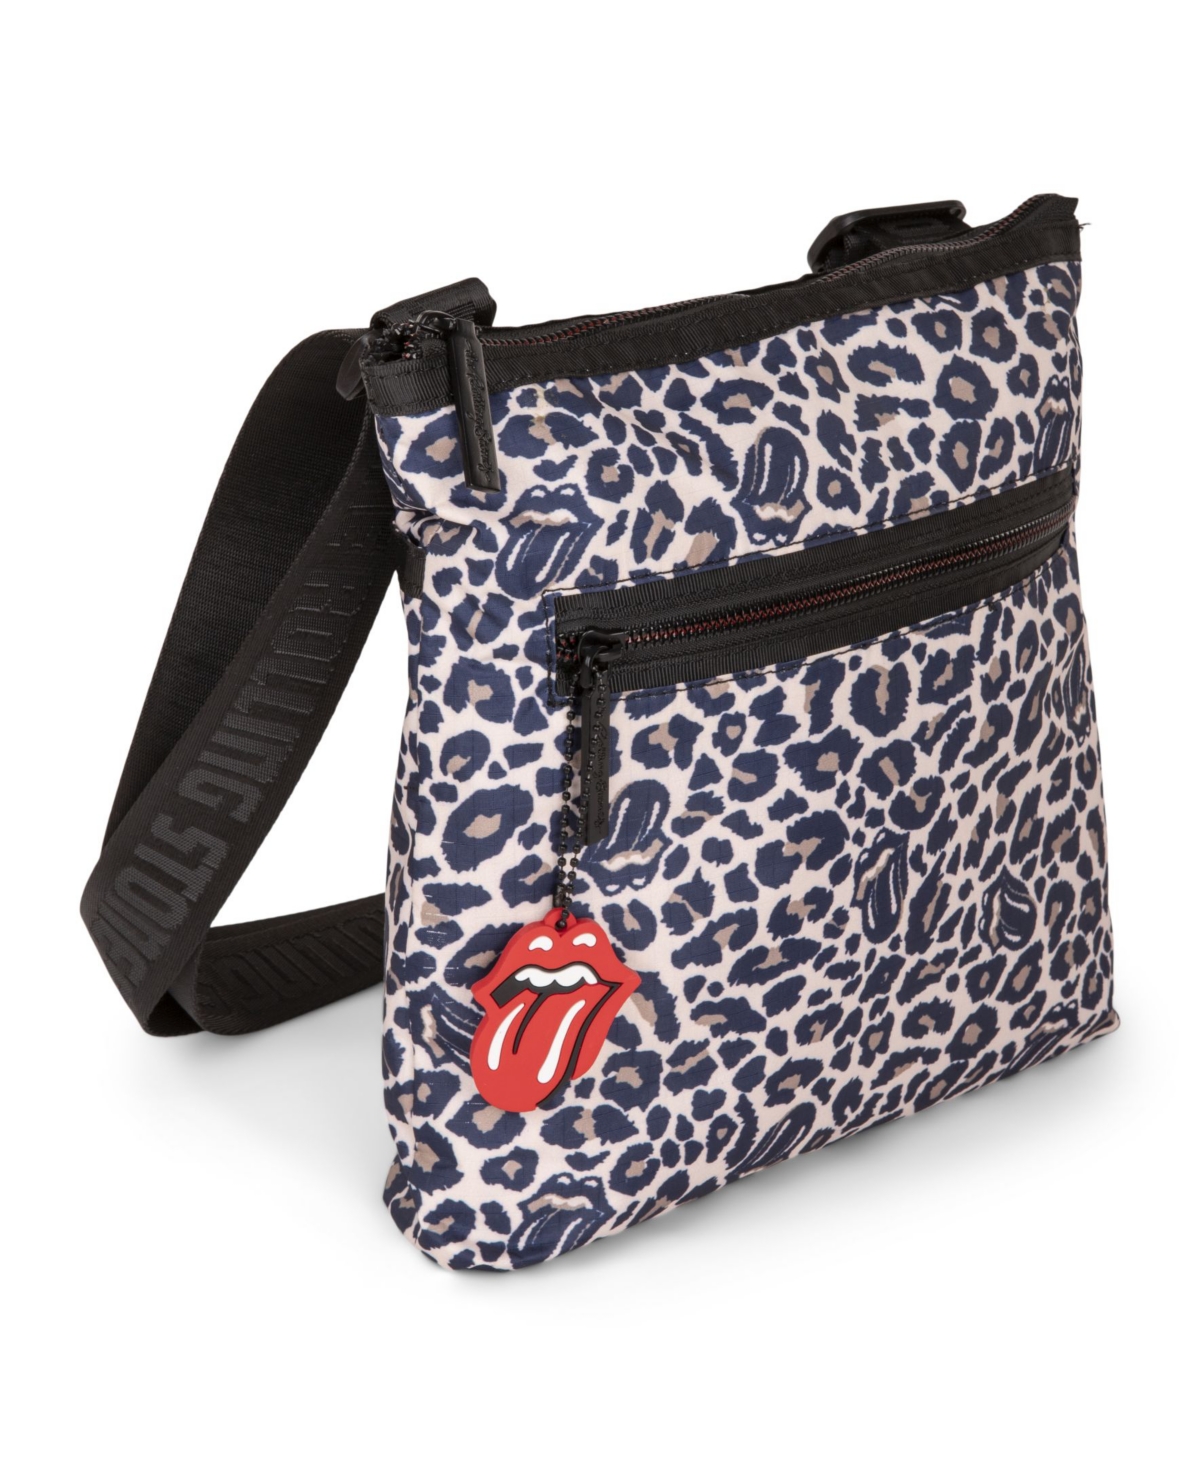 Evolution Collection Crossbody Bag with Top Main Zippered Opening - Cheetah Print